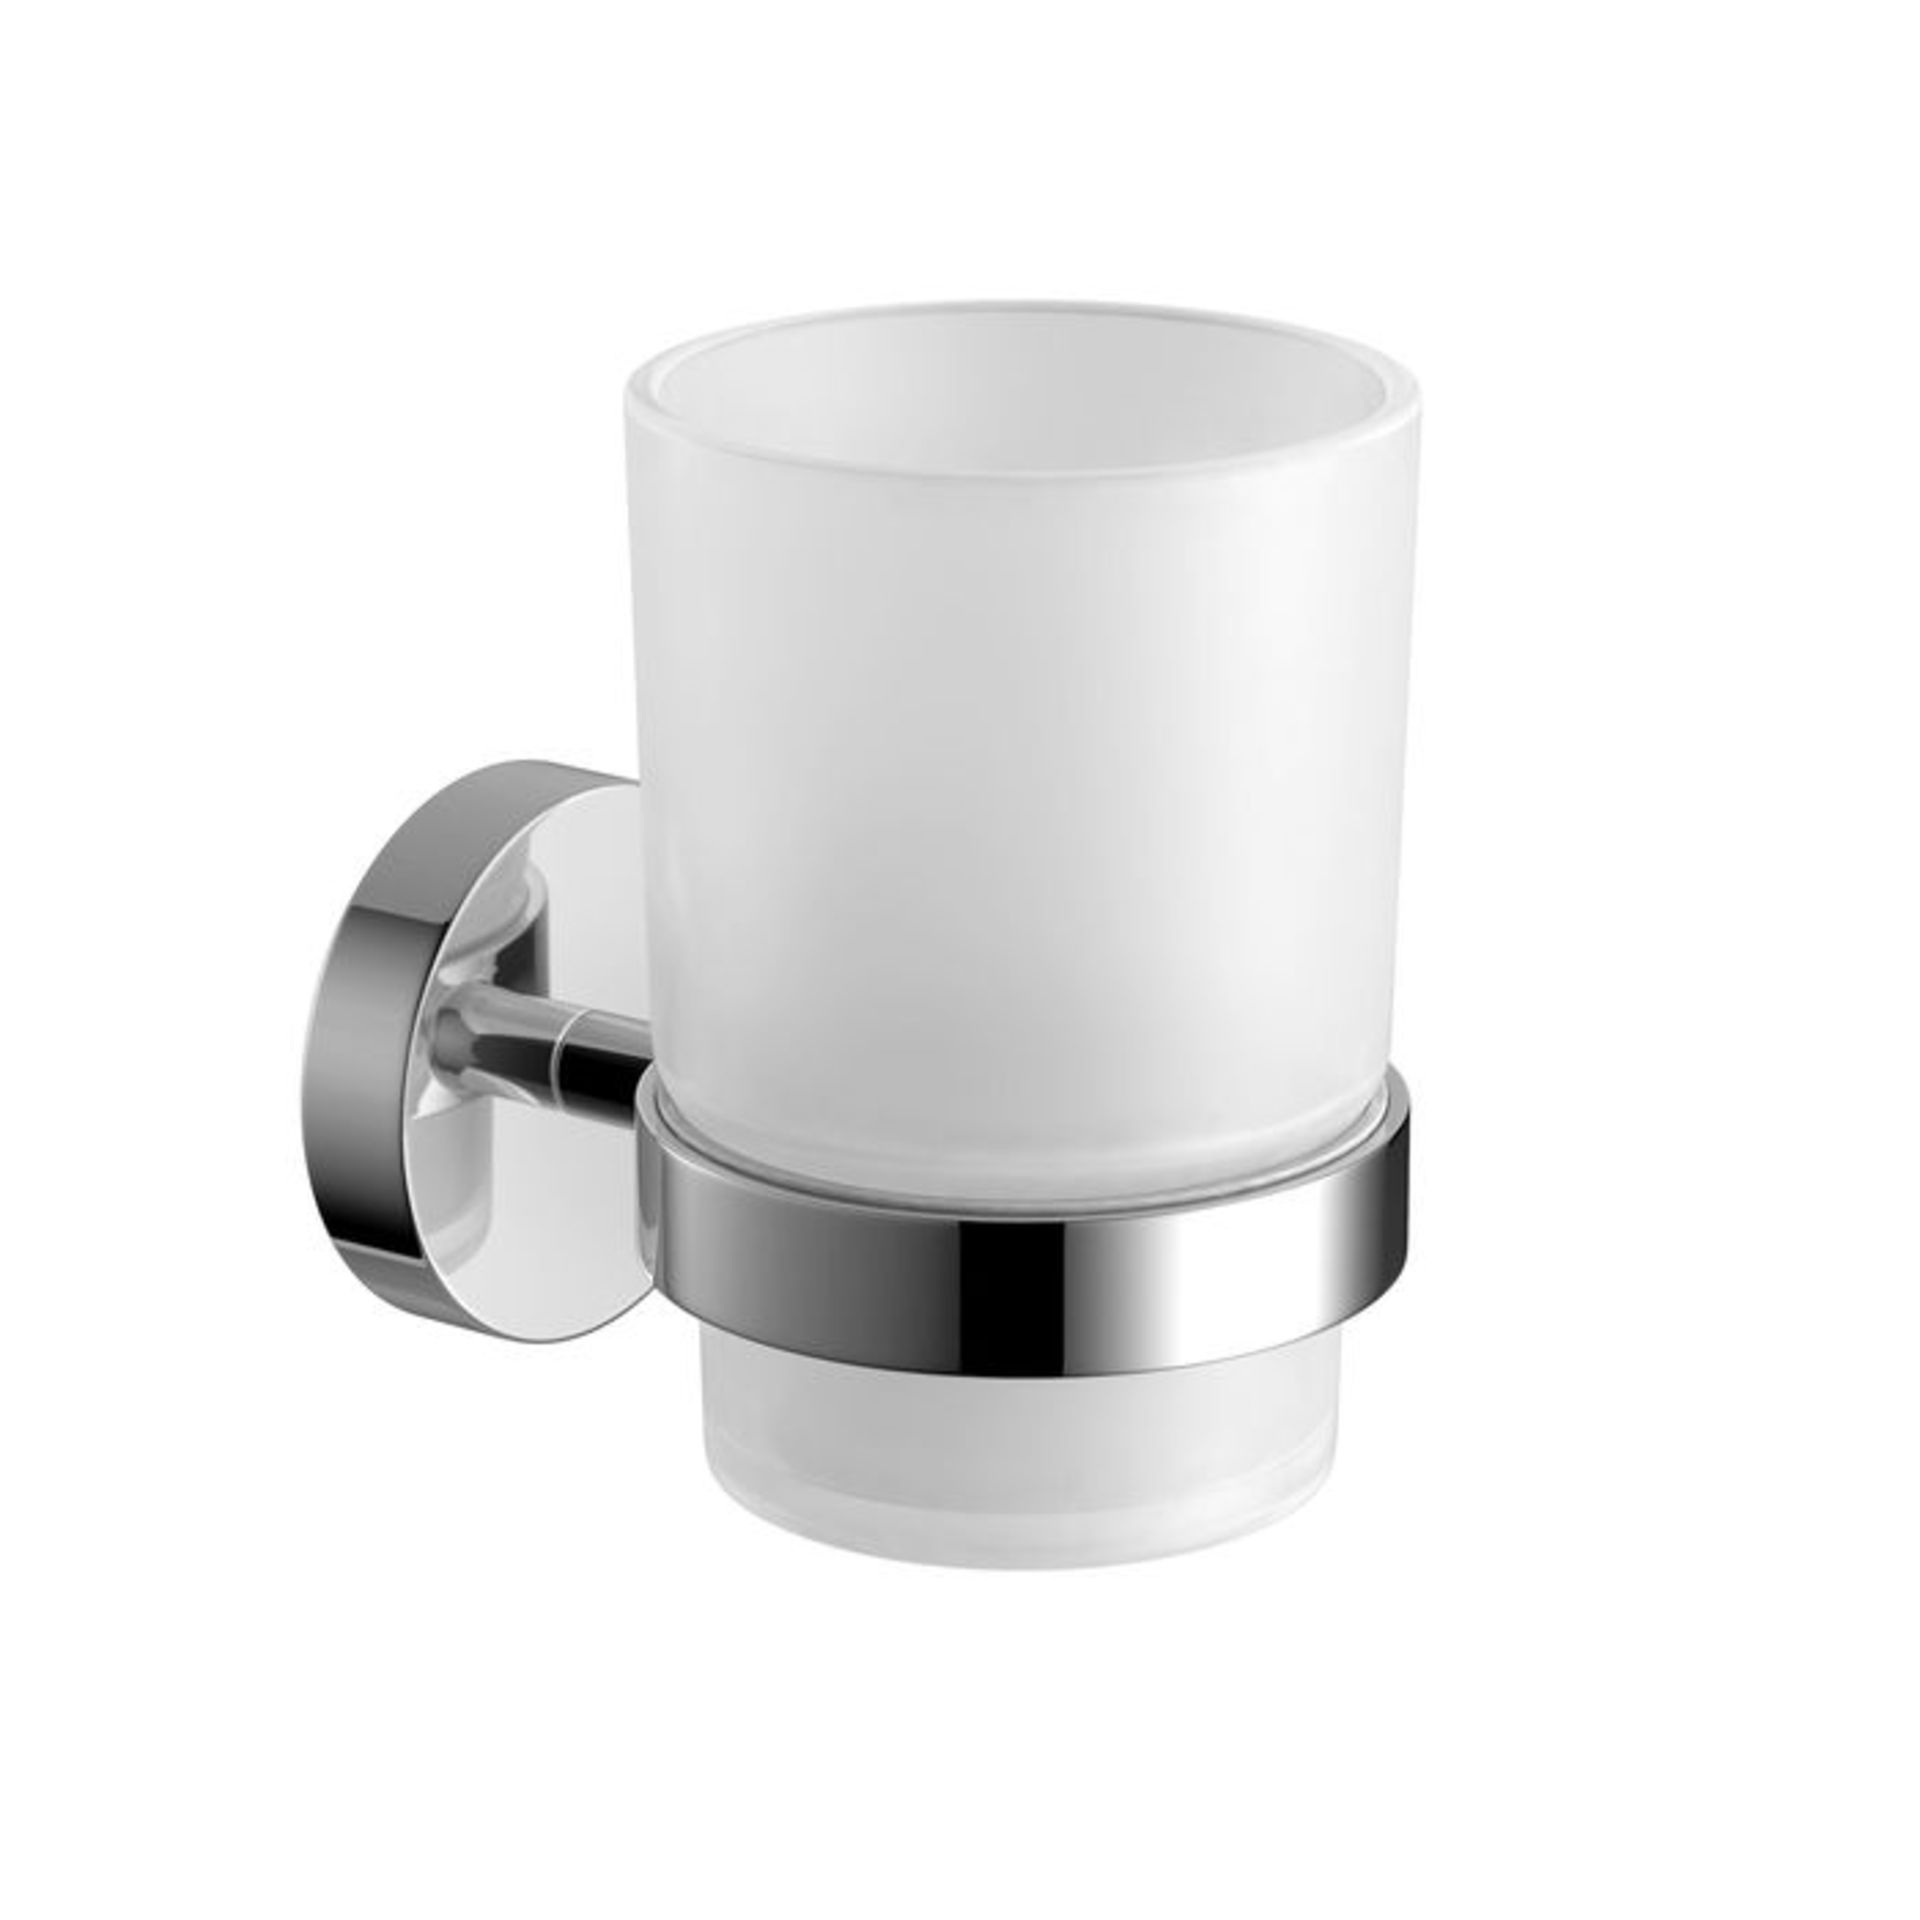 (NF120) Finsbury Tumbler Holder. Completes your bathroom with a little extra functionality and style